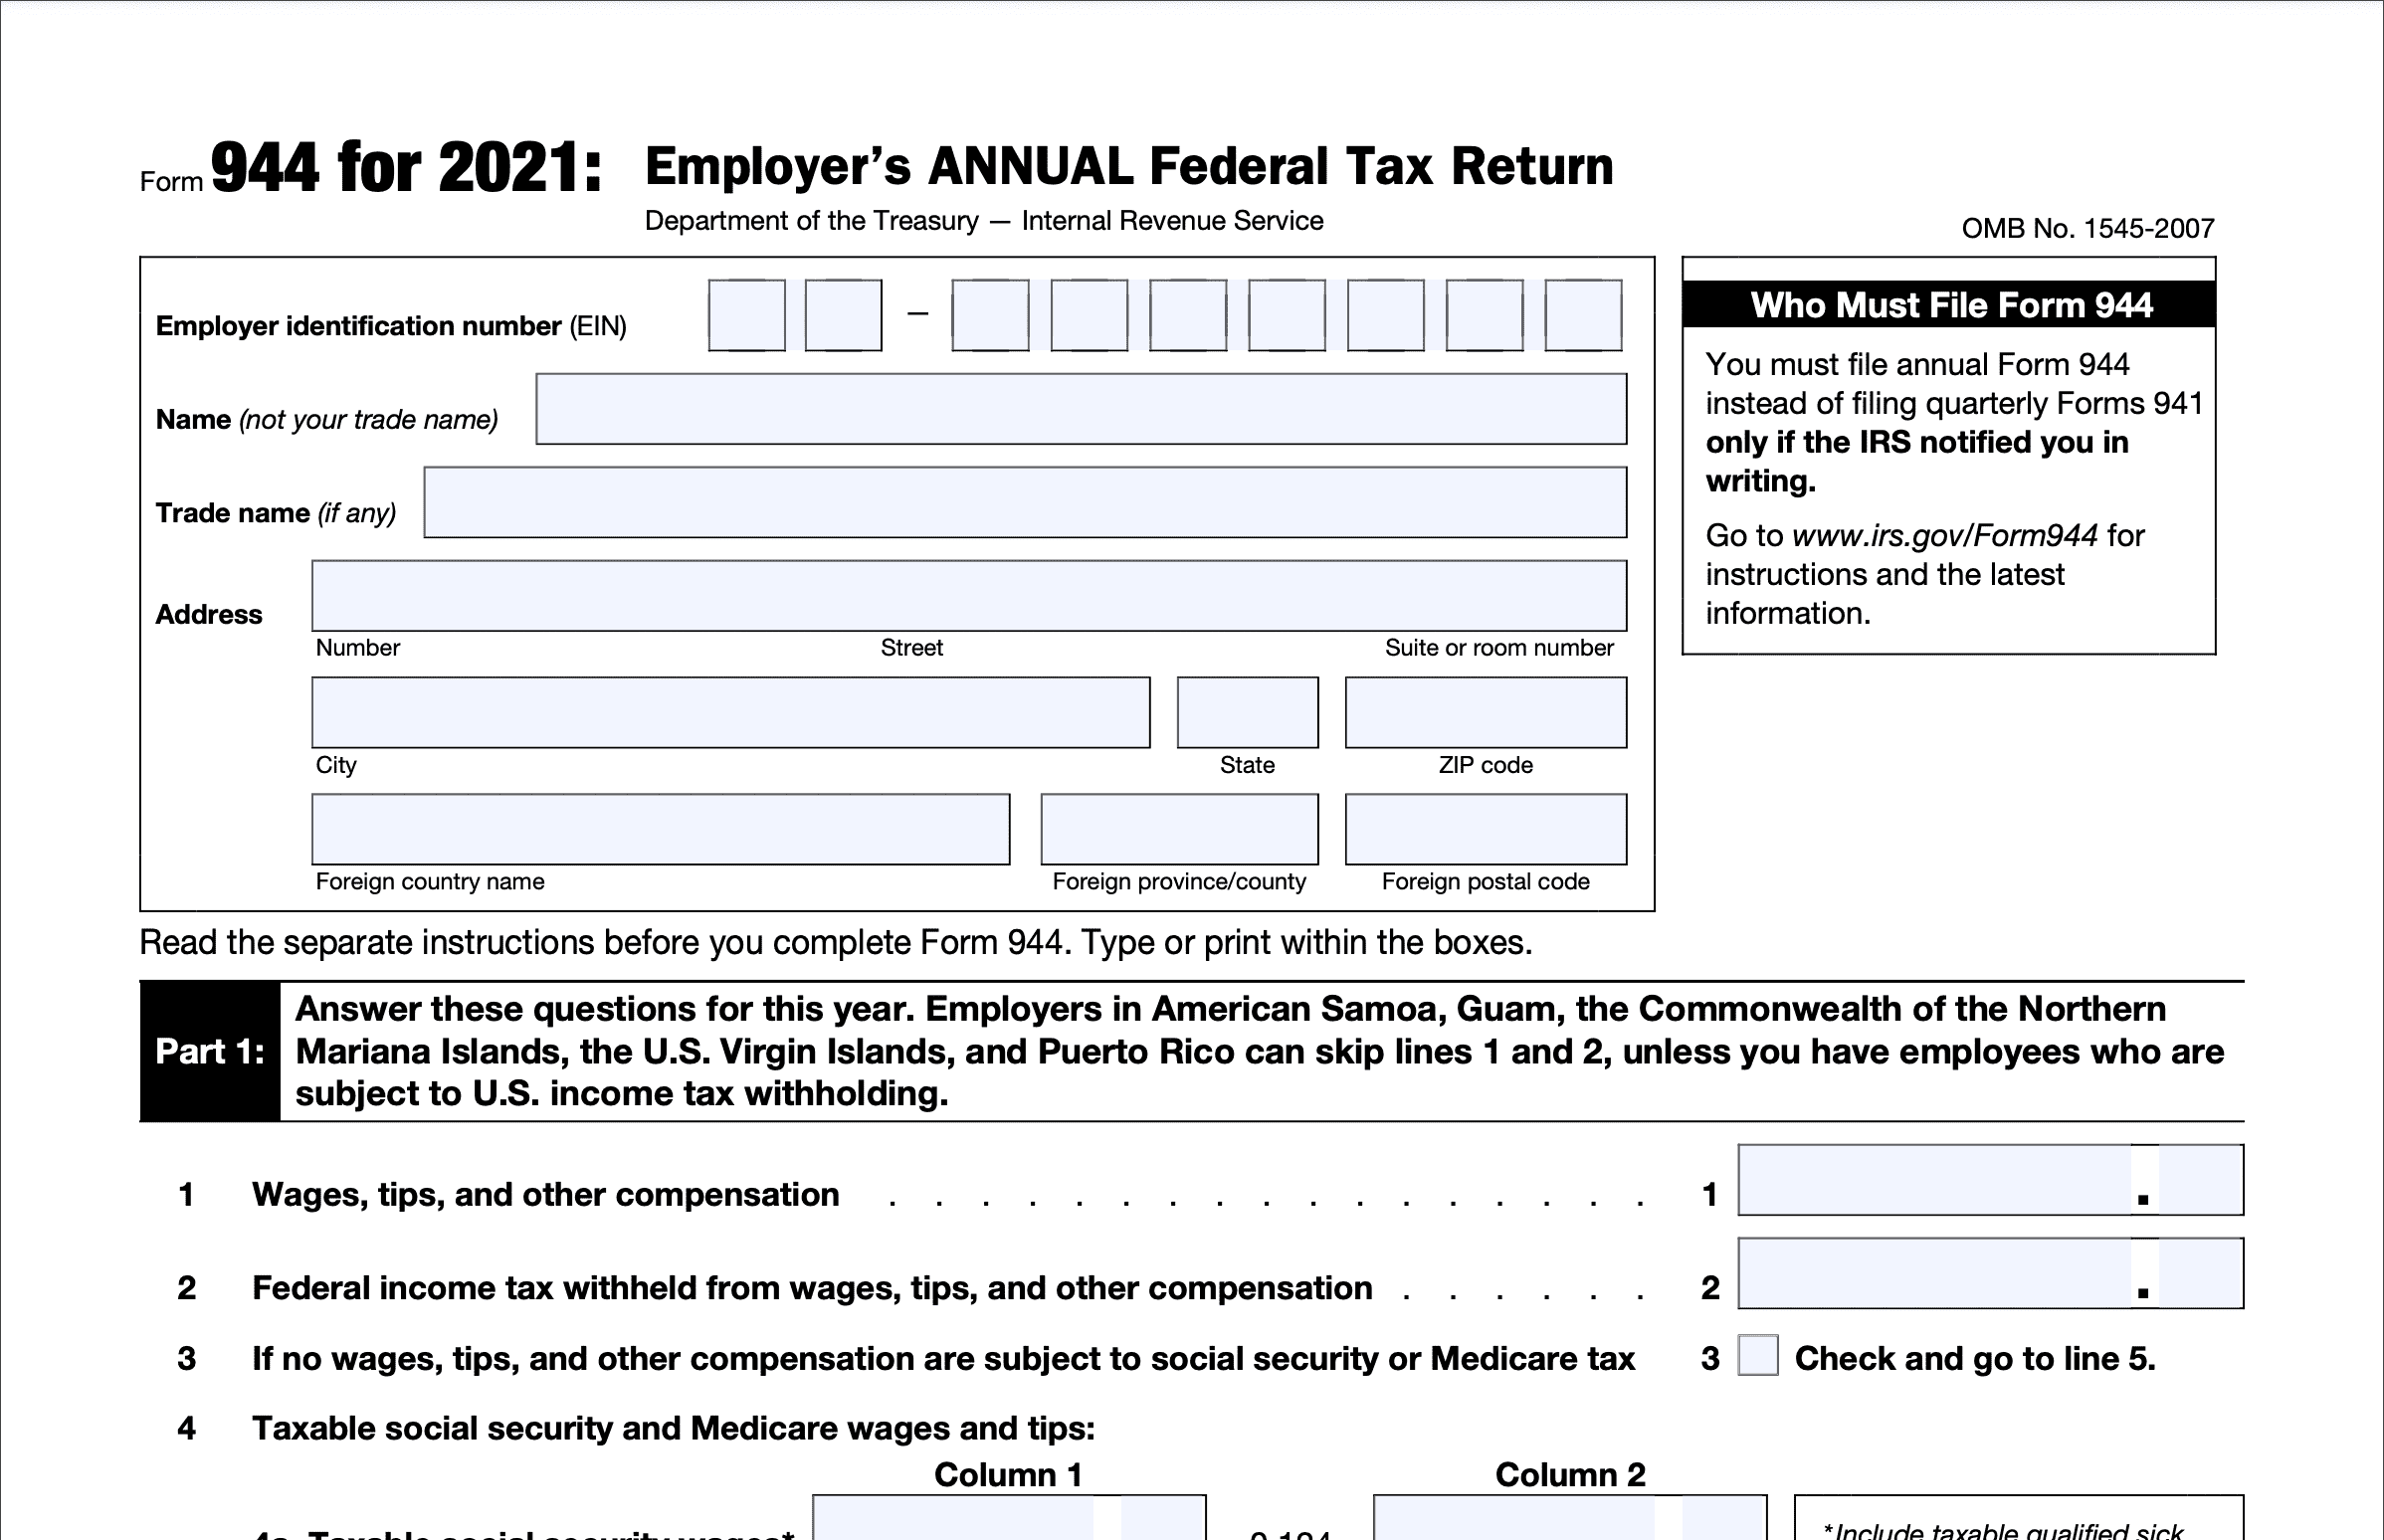 Image of Form 944 for Employer's Annual Federal Tax Return. Must file if notified by IRS. Includes EIN, name, address, wages, tax withheld, and more.